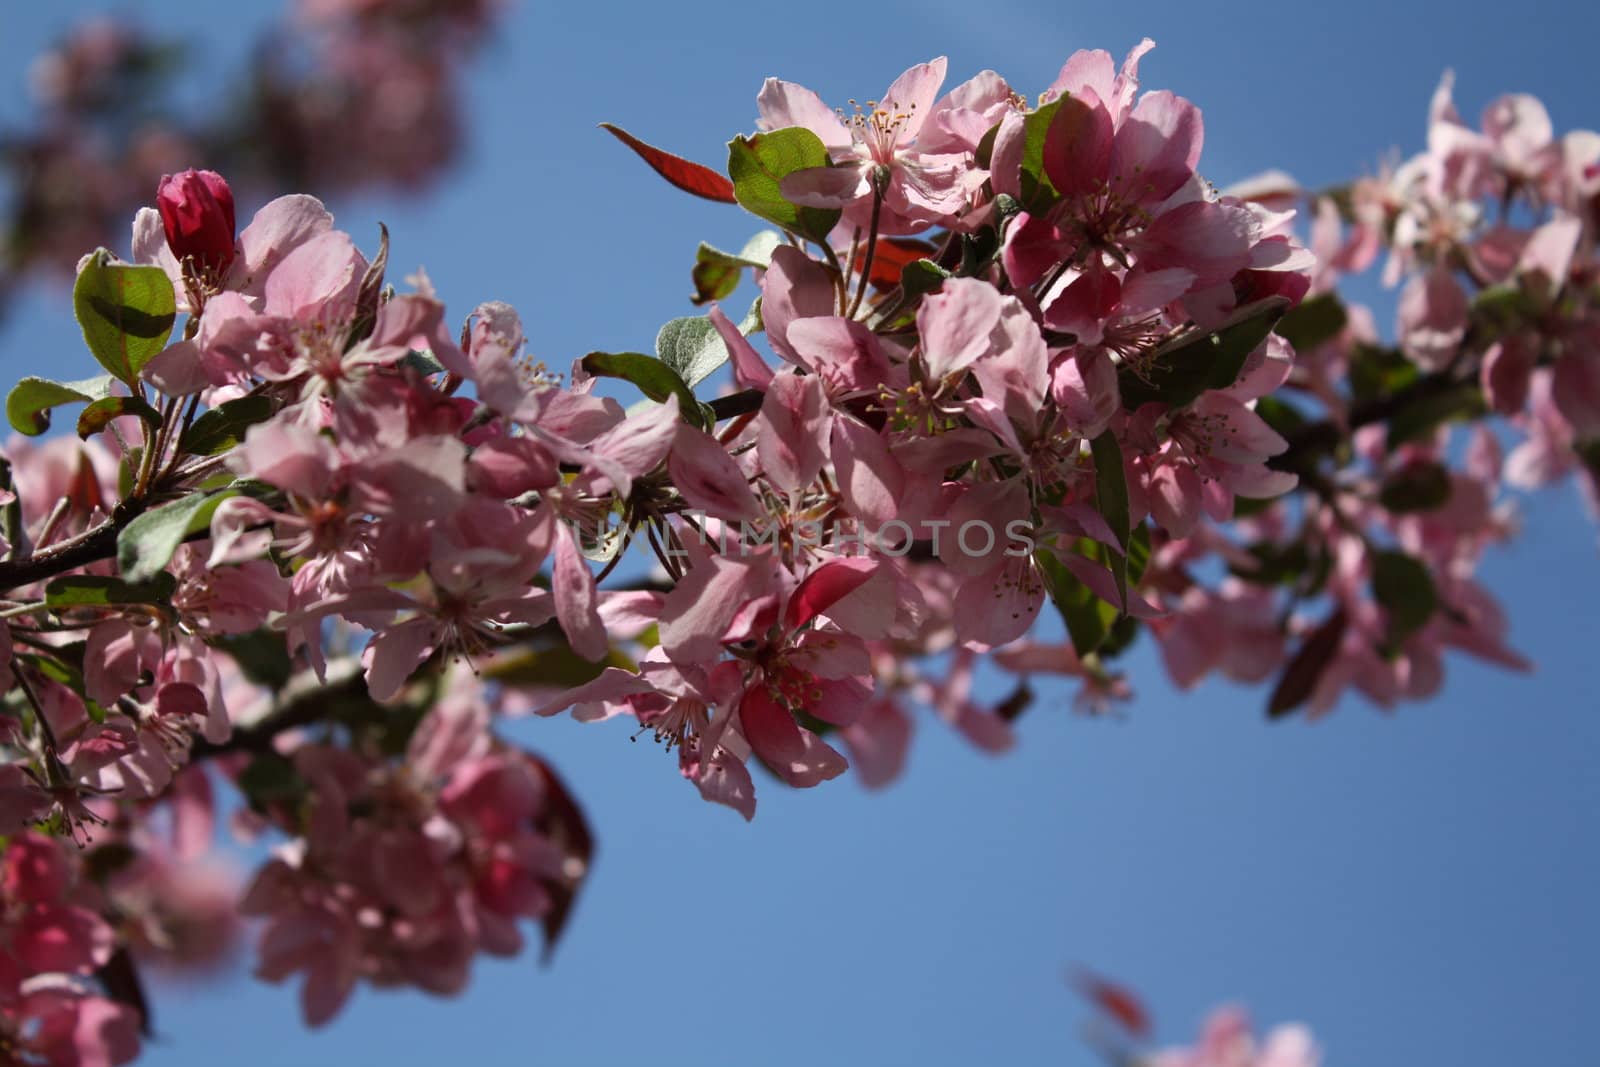 pink flower leafs growing on a tree in the clear sky